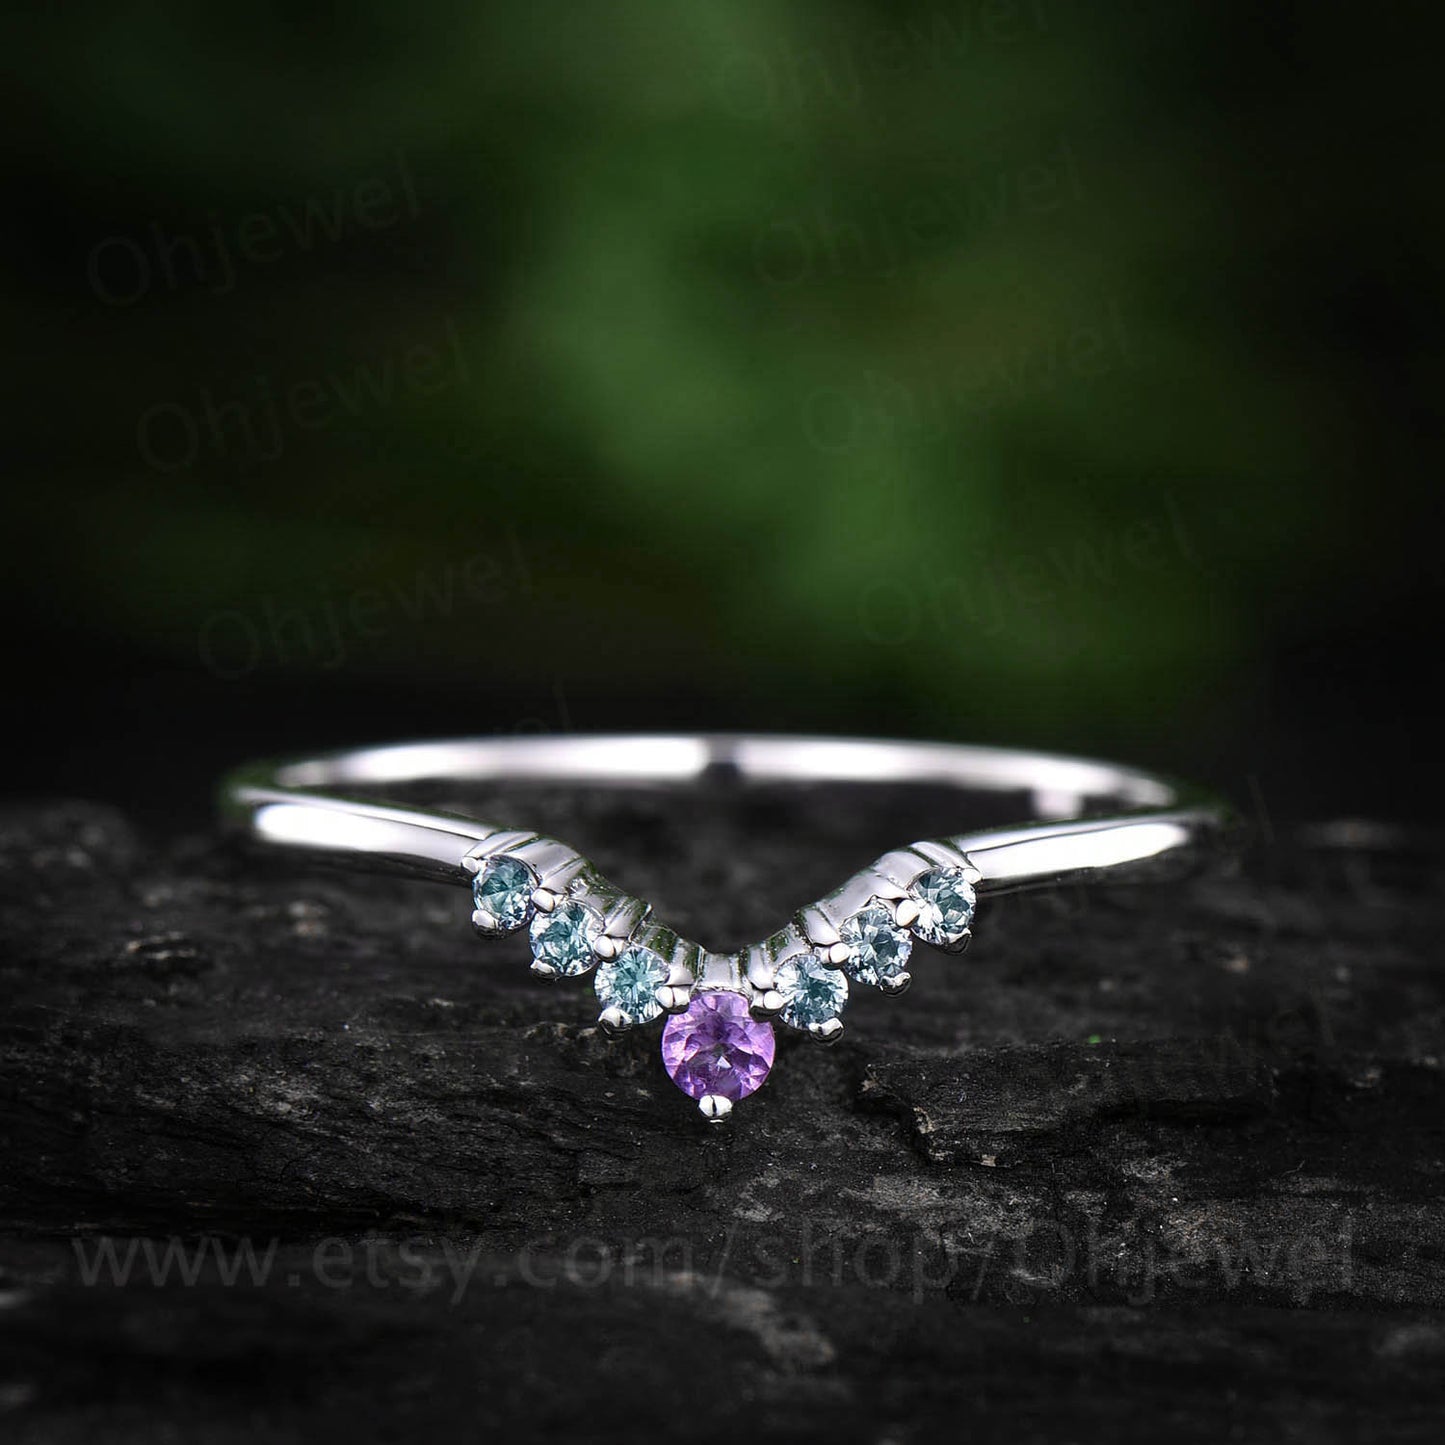 Amethyst ring Curved V Alexandrite wedding band matching stacking ring band white gold jewelry anniversary birthday gift